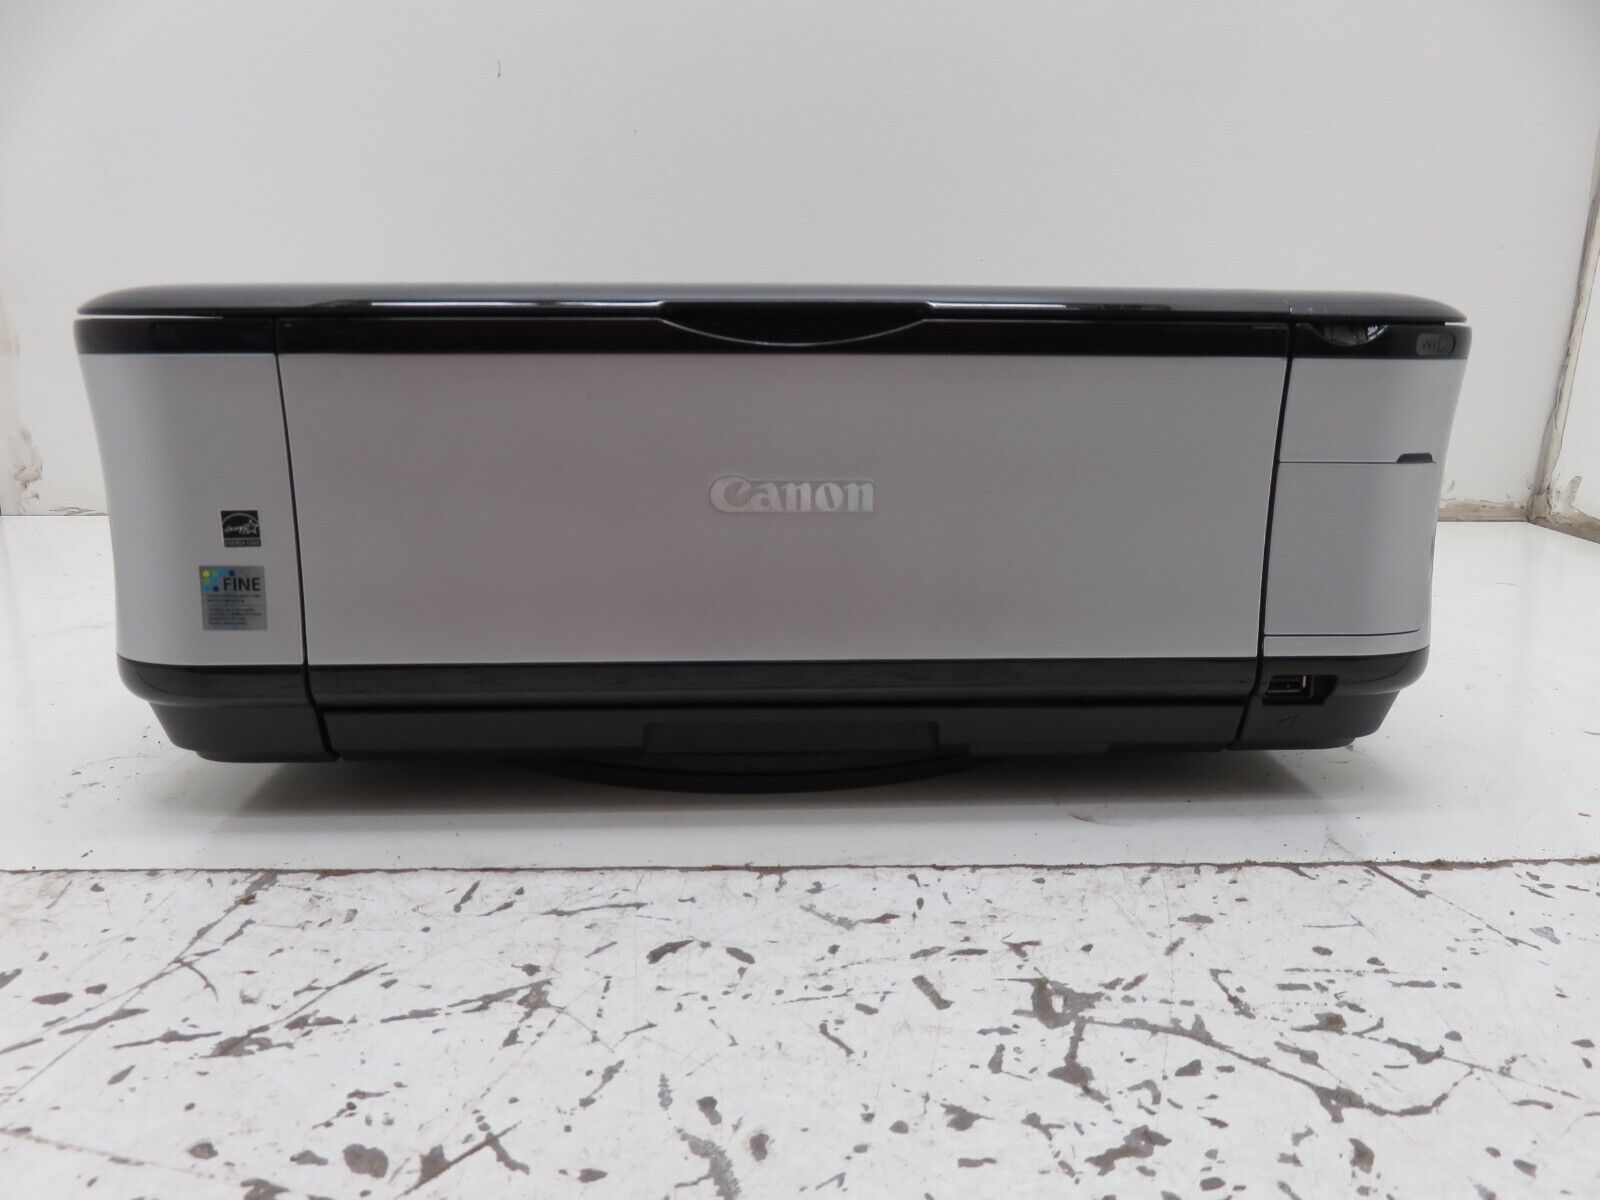 Canon PIXMA MP560 All-in-One Wireless Inkjet Printer - No Ink